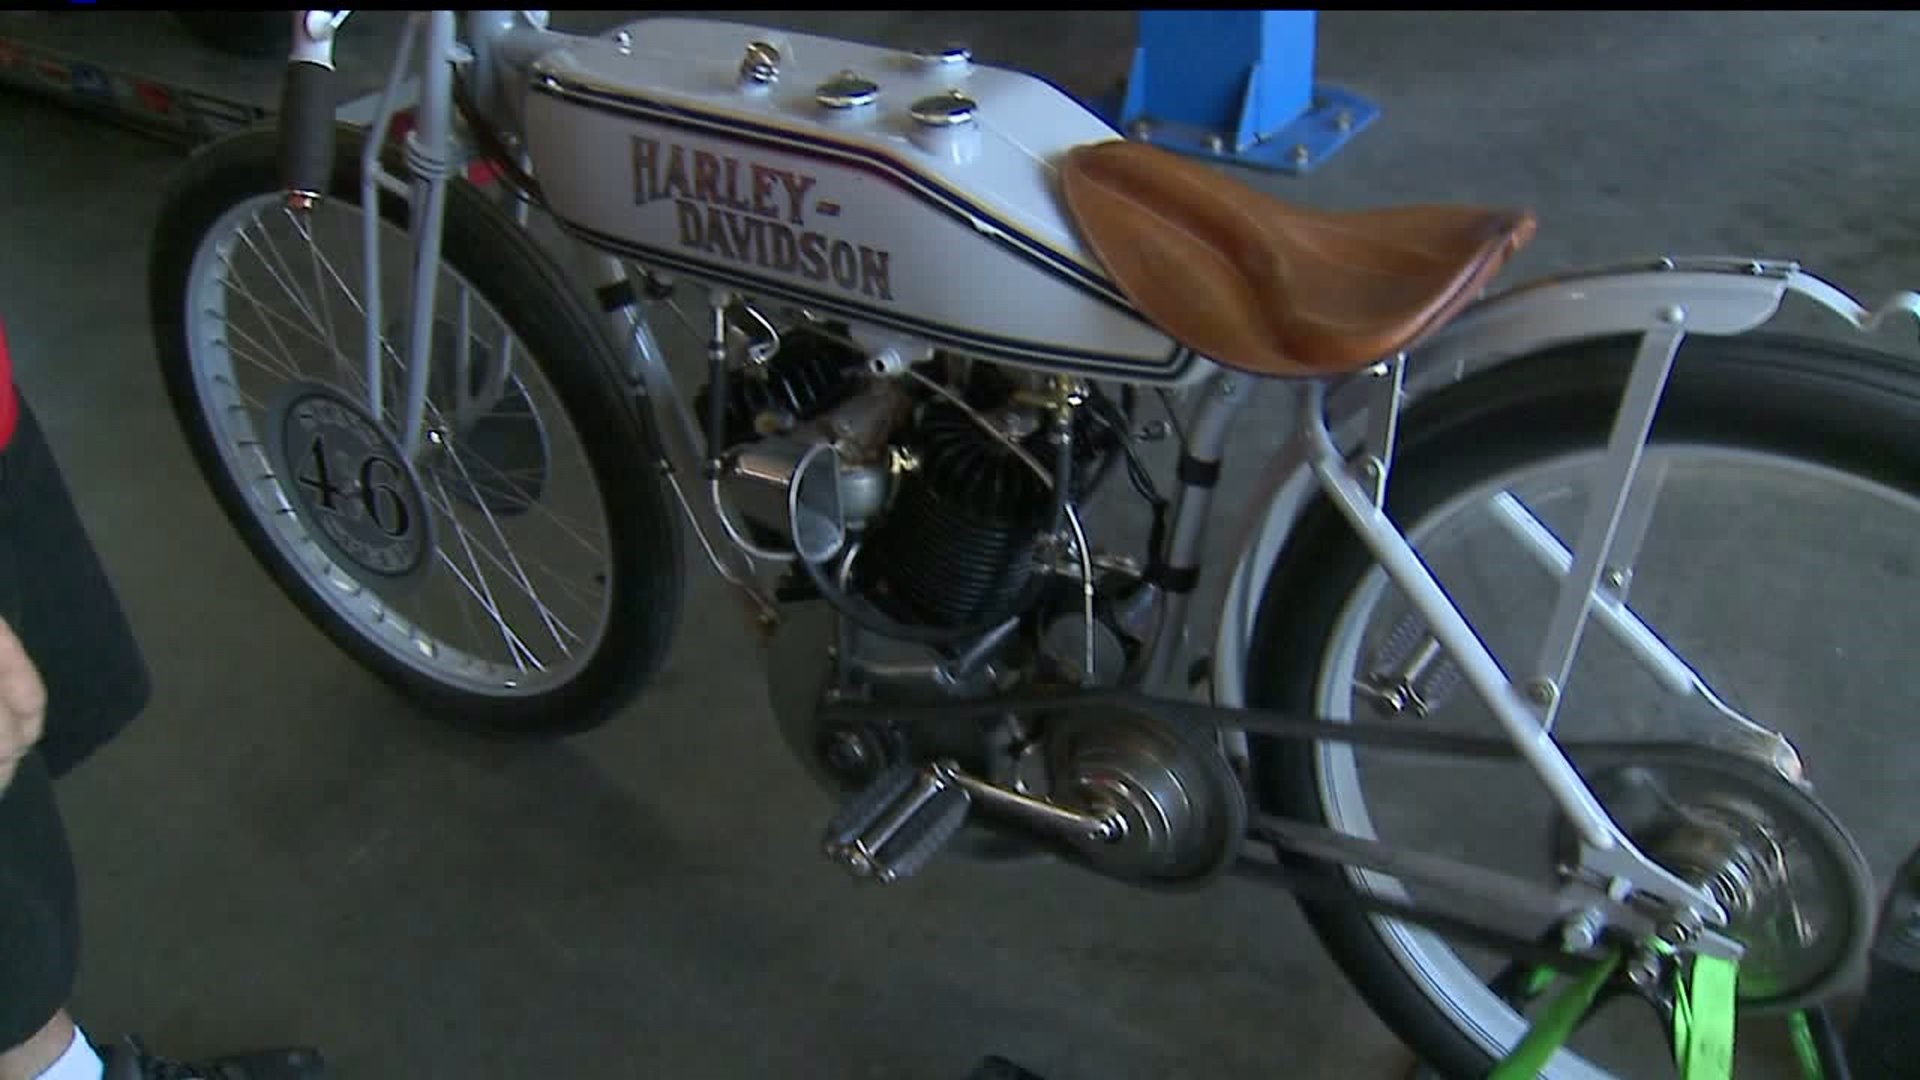 From PA State Trooper to vintage Harley-Davidson builder and racer